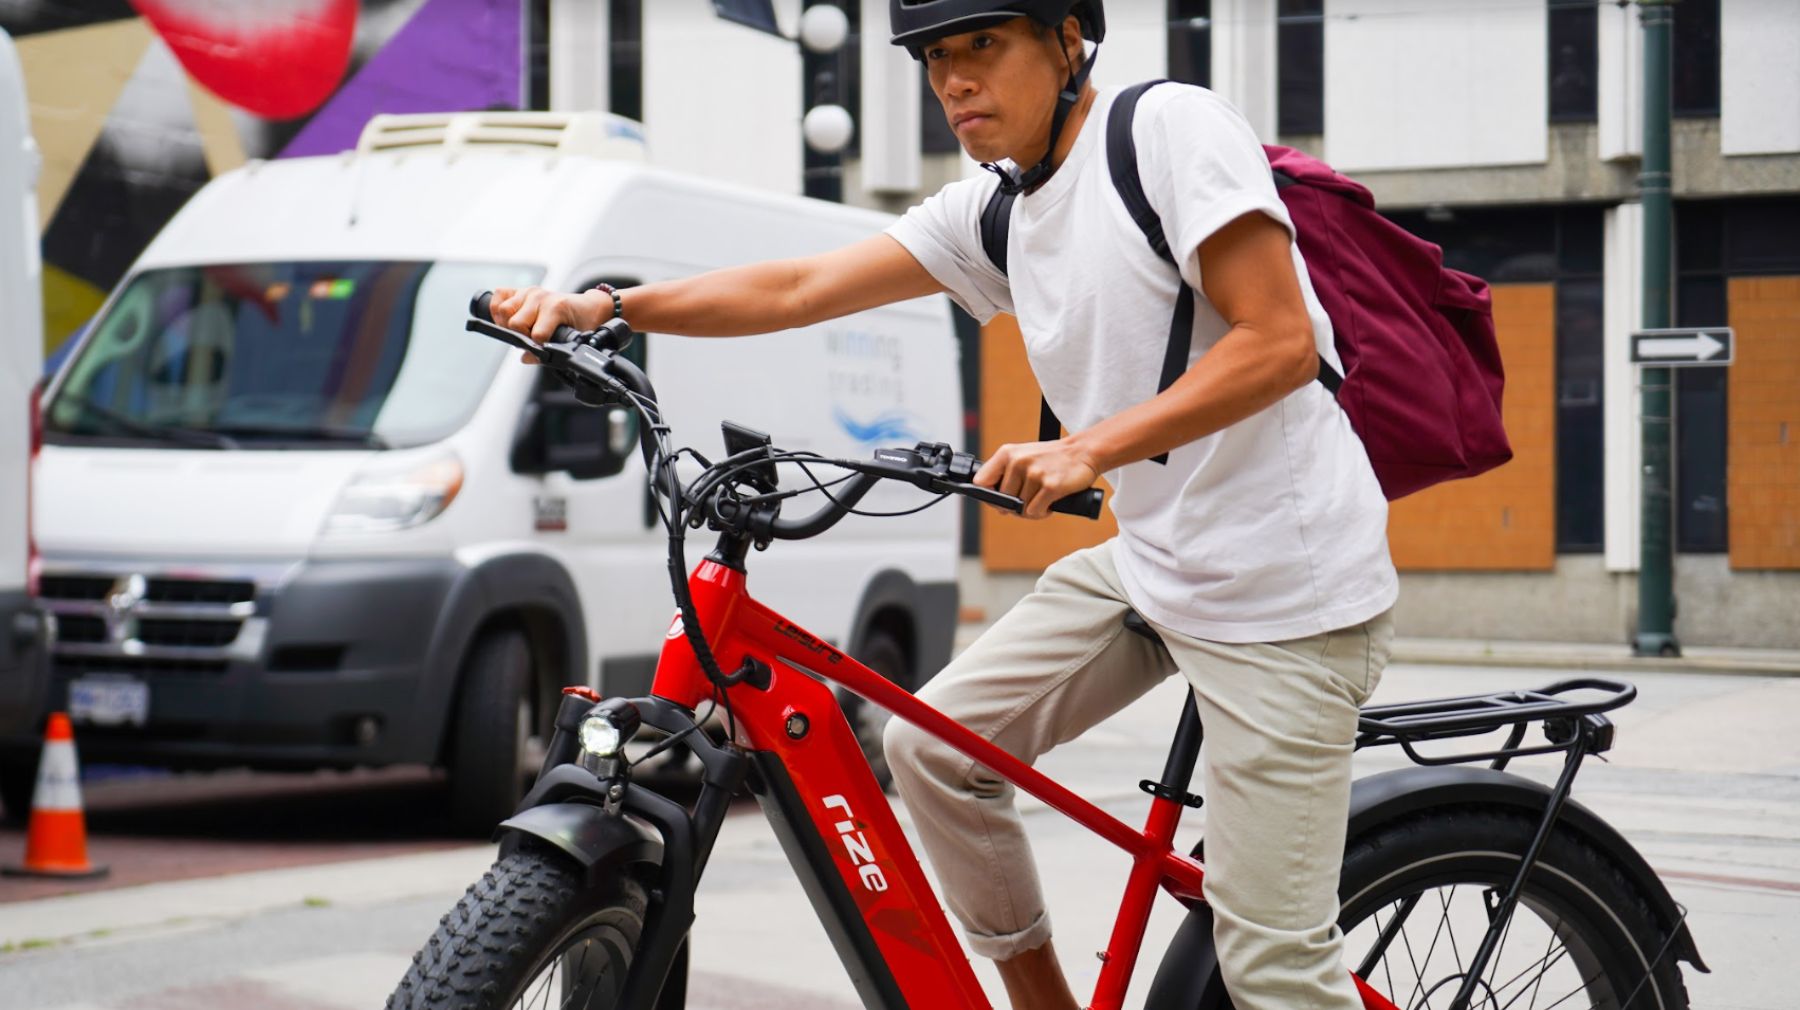 Using The Ebike For a Healthier Lifestyle